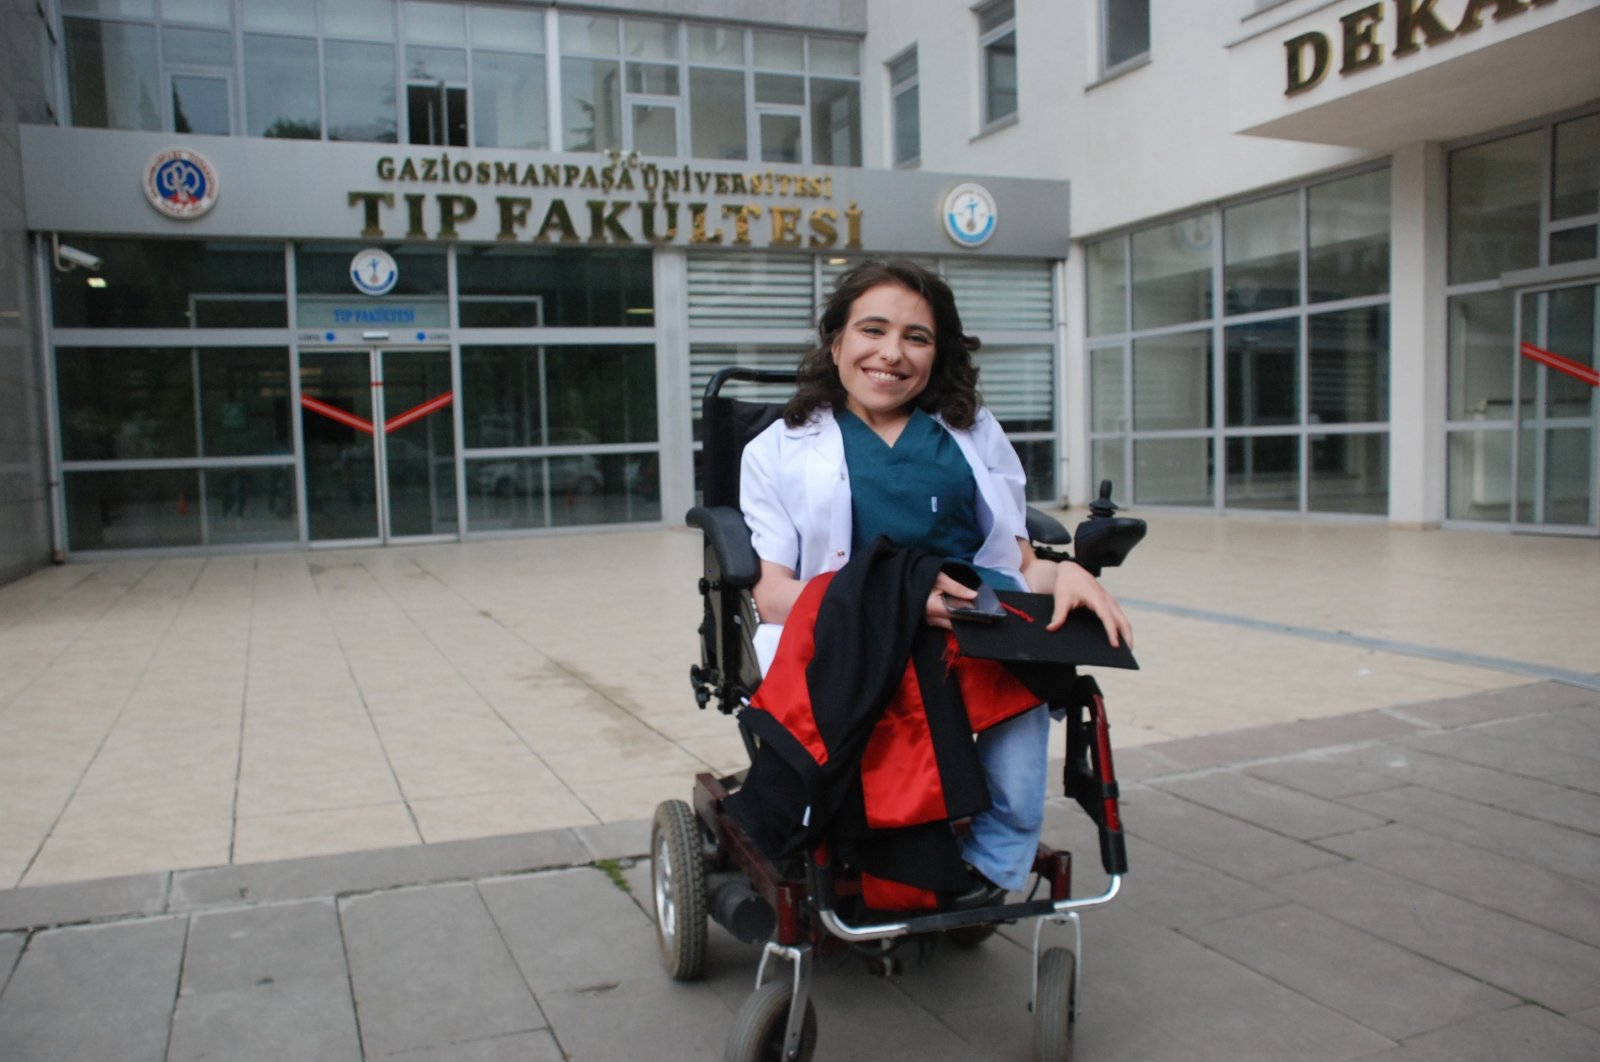 Dr. Sare Aydın poses for a photo outside her university after finishing her residency to become a specialist in her field, Tokat, northern Türkiye, Dec. 3, 2022. (IHA Photo)